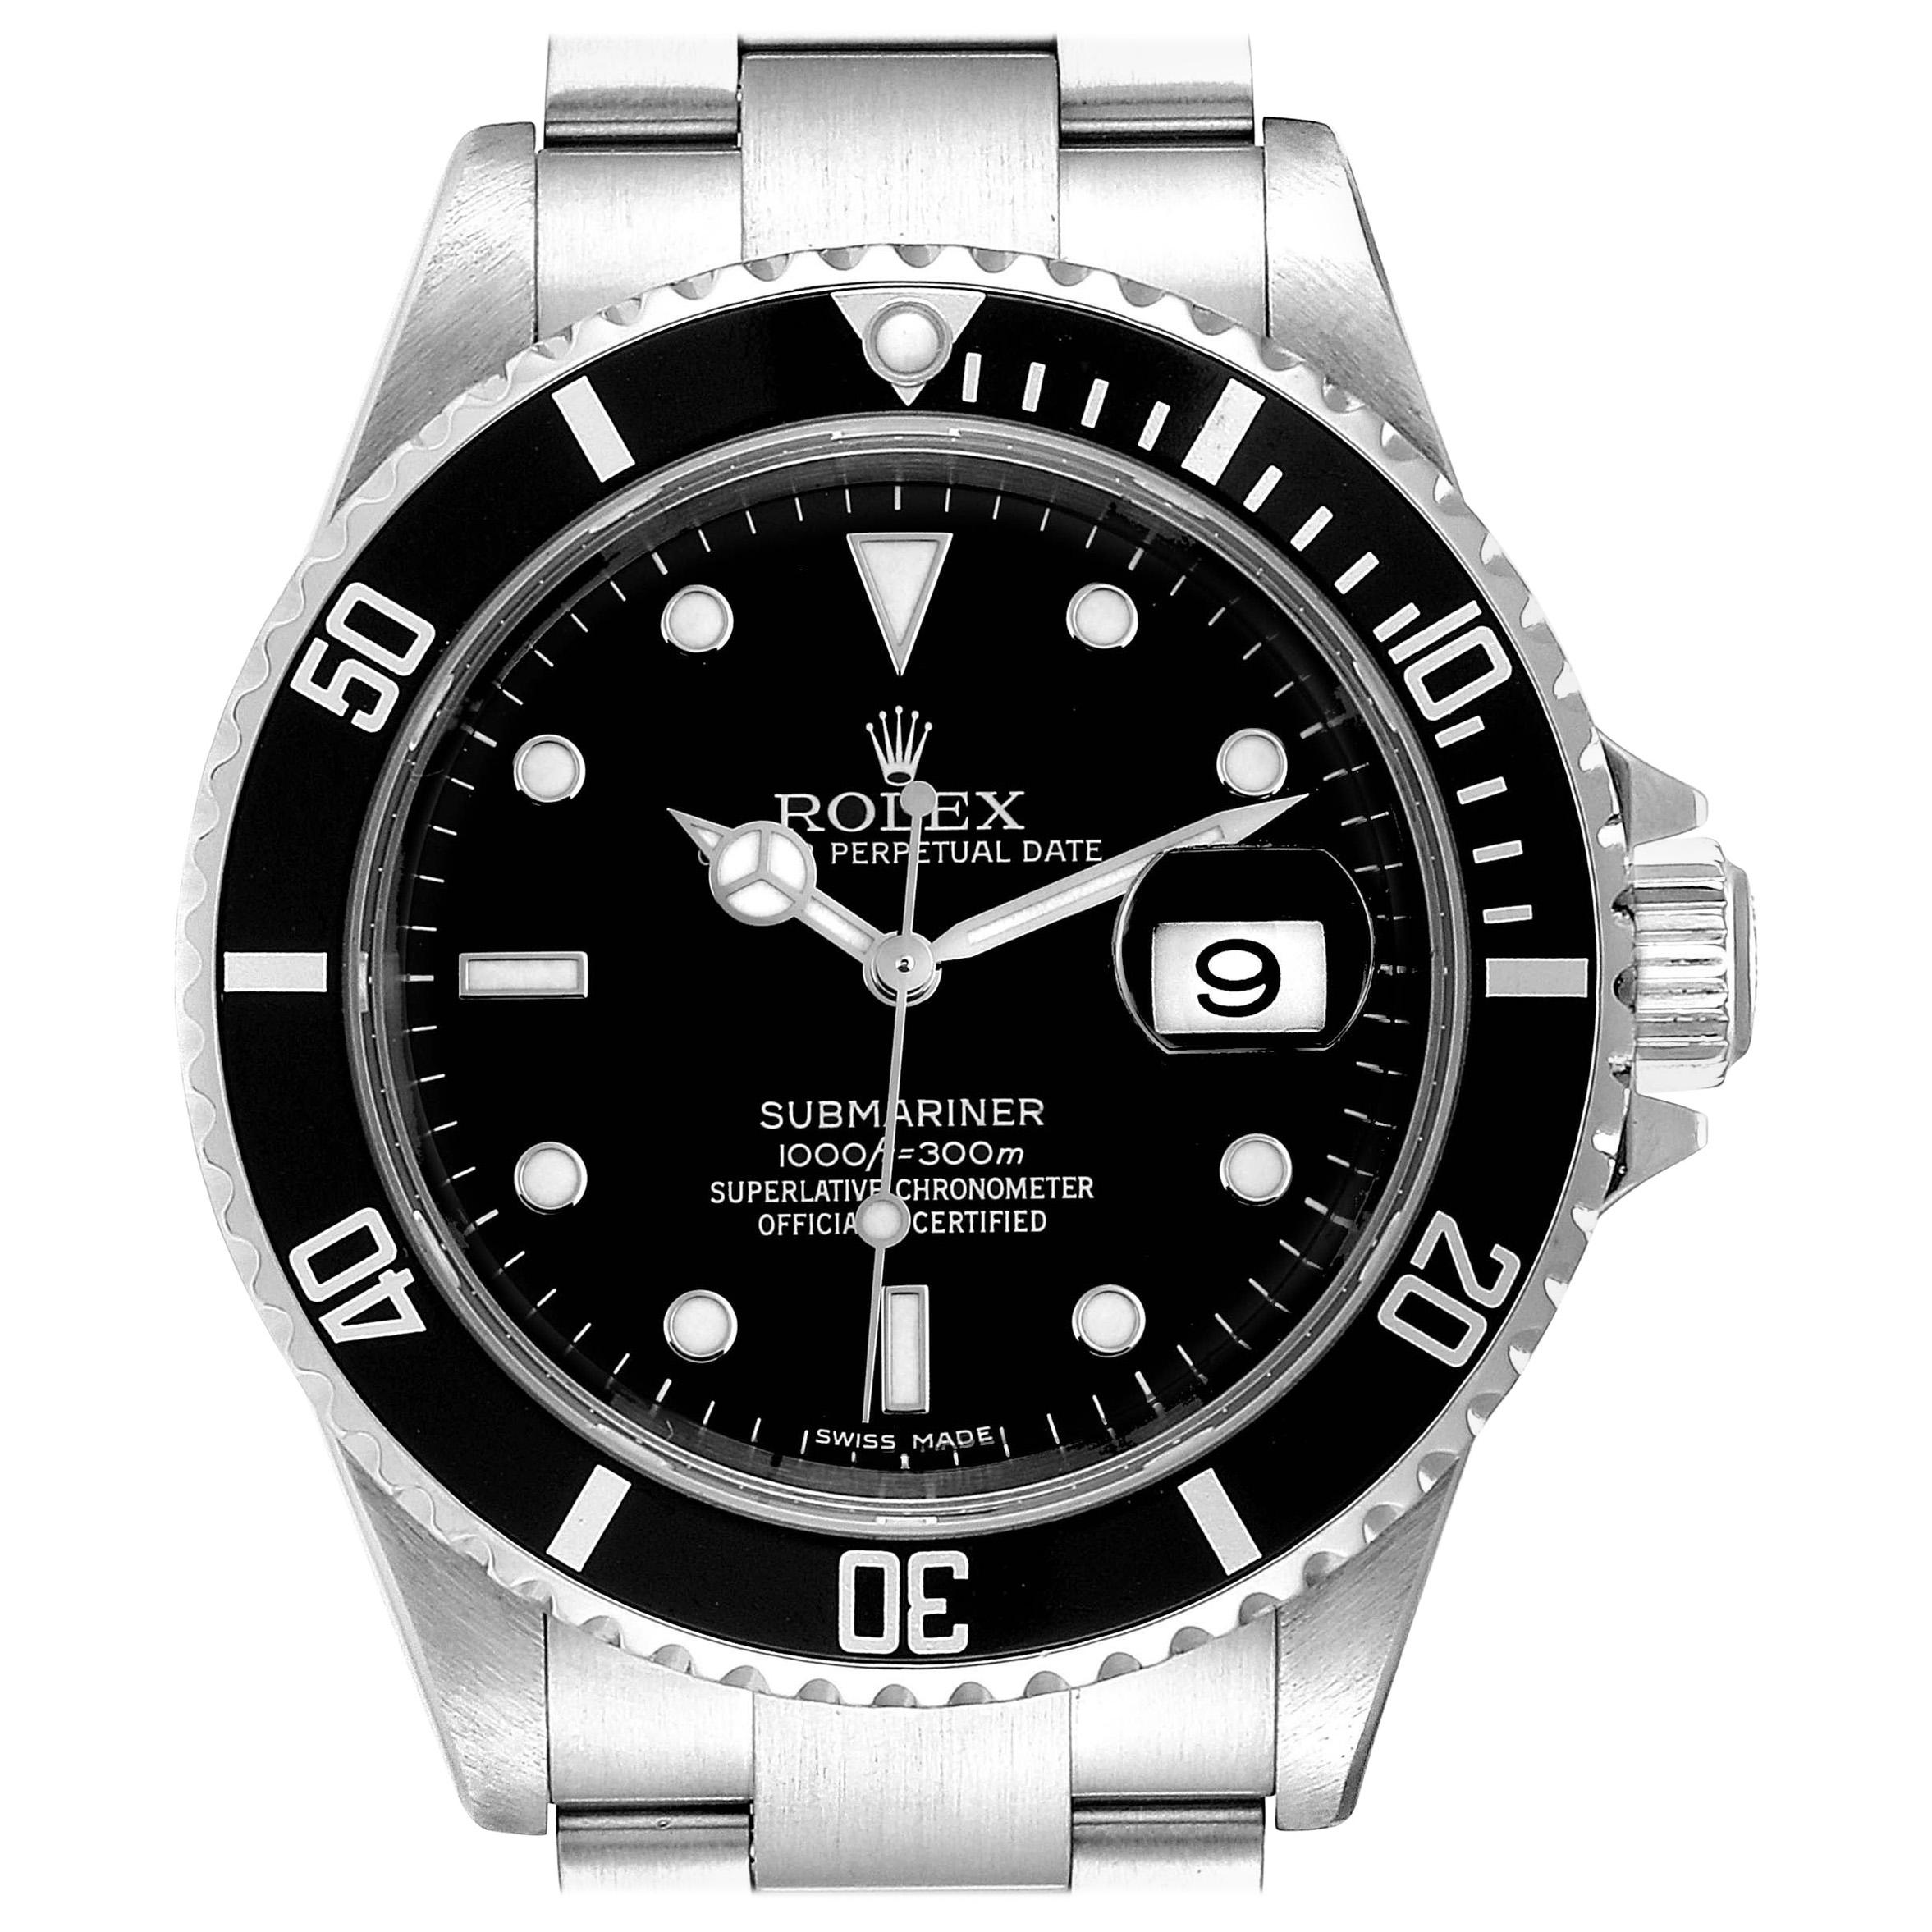 Rolex Submariner Date Stainless Steel Men's Watch 16610 For Sale